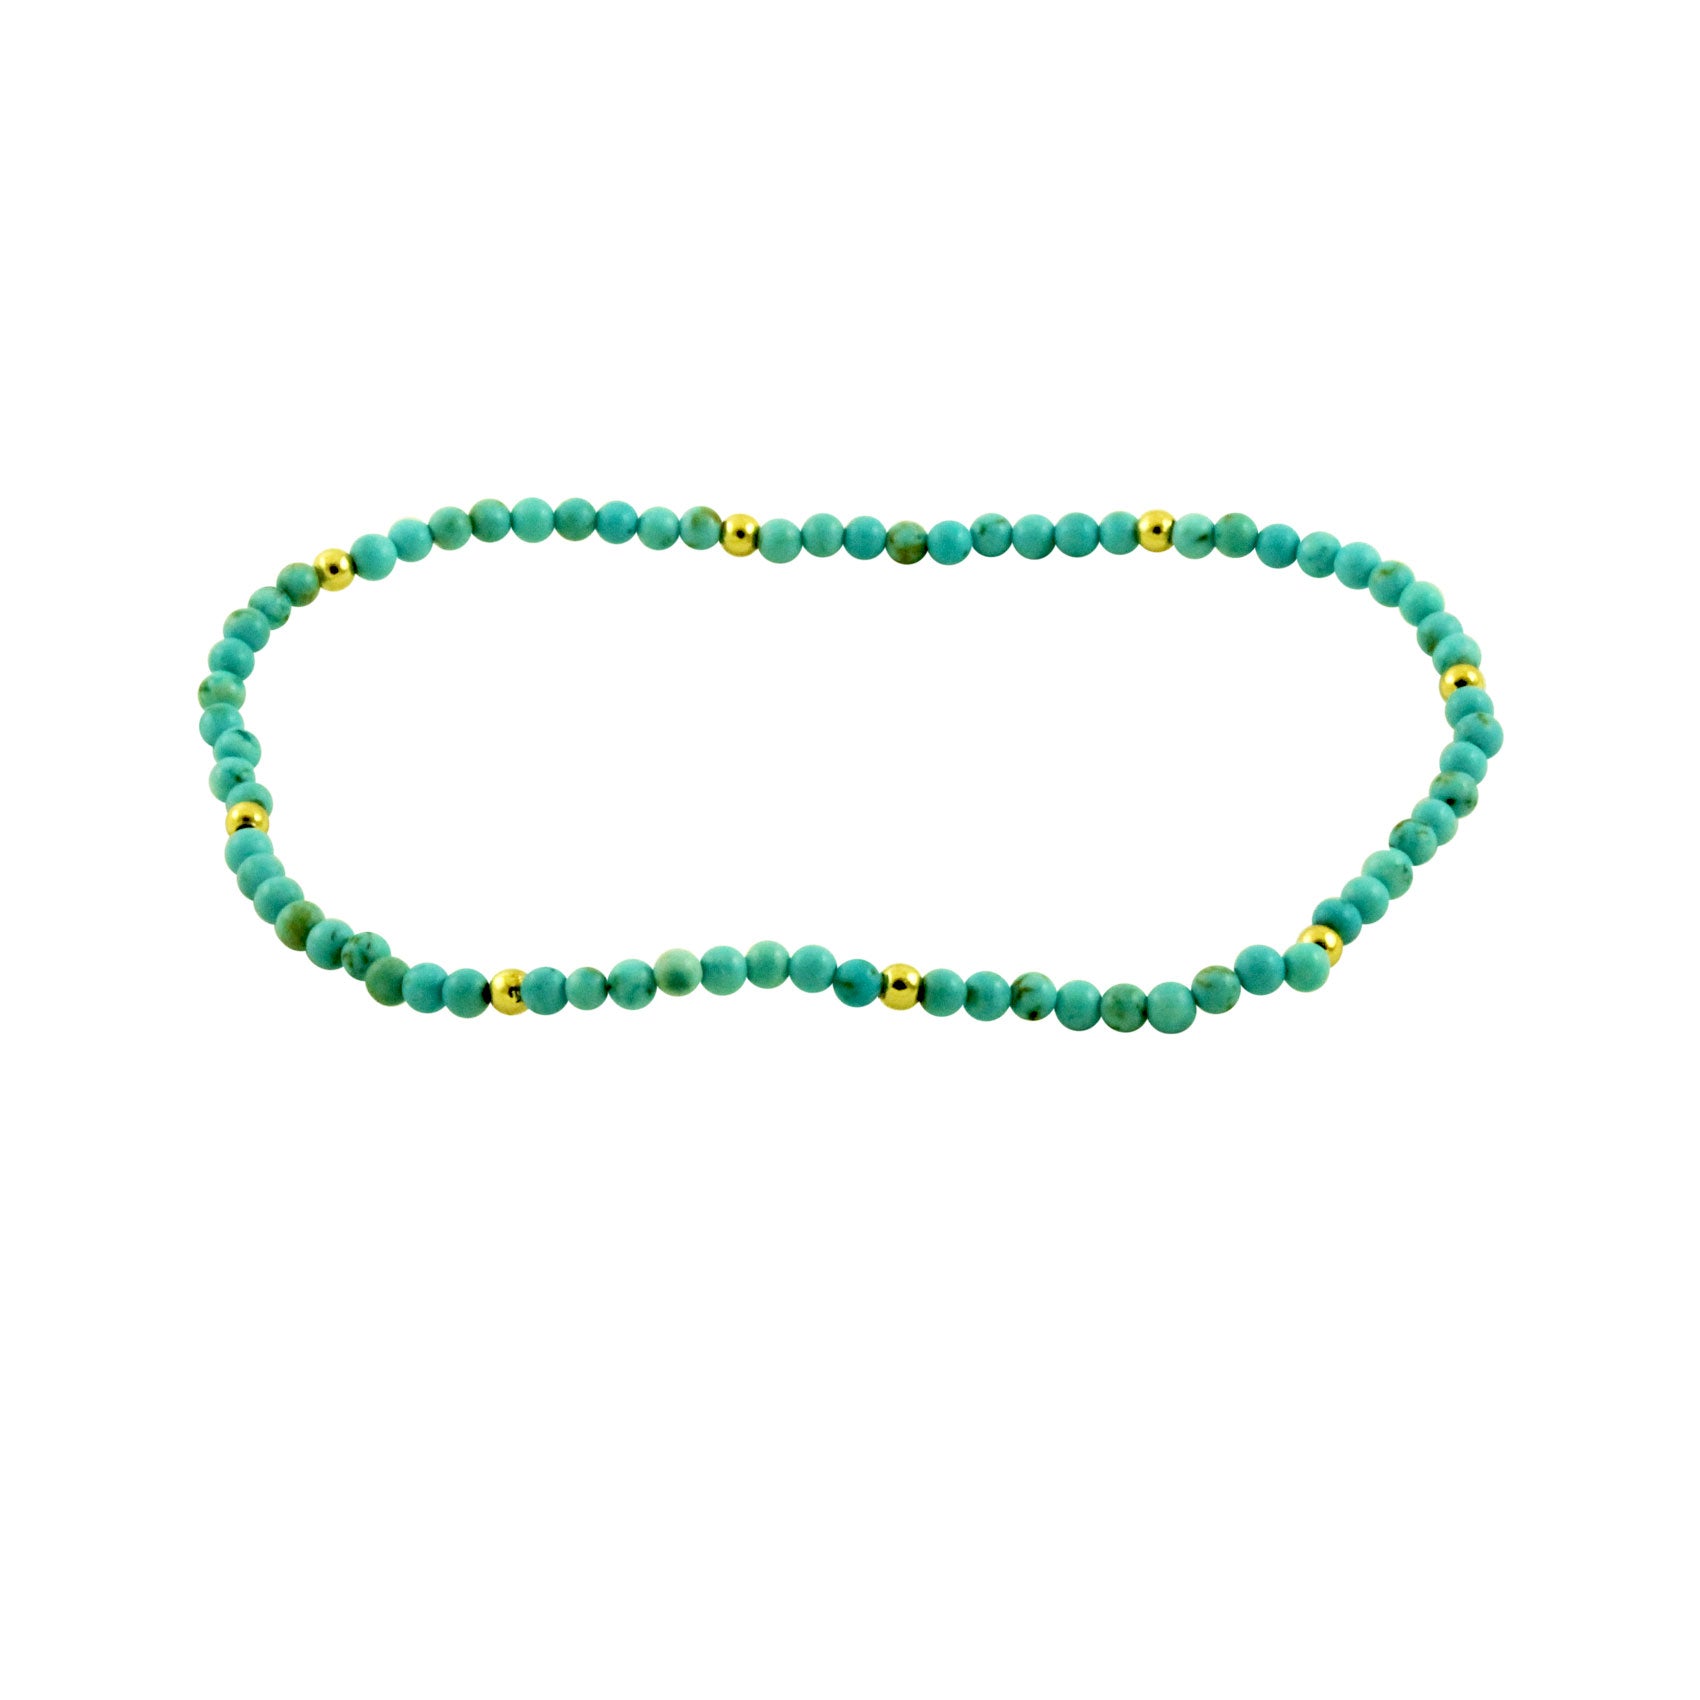 Turquoise Bead Strand Bracelet with Accent